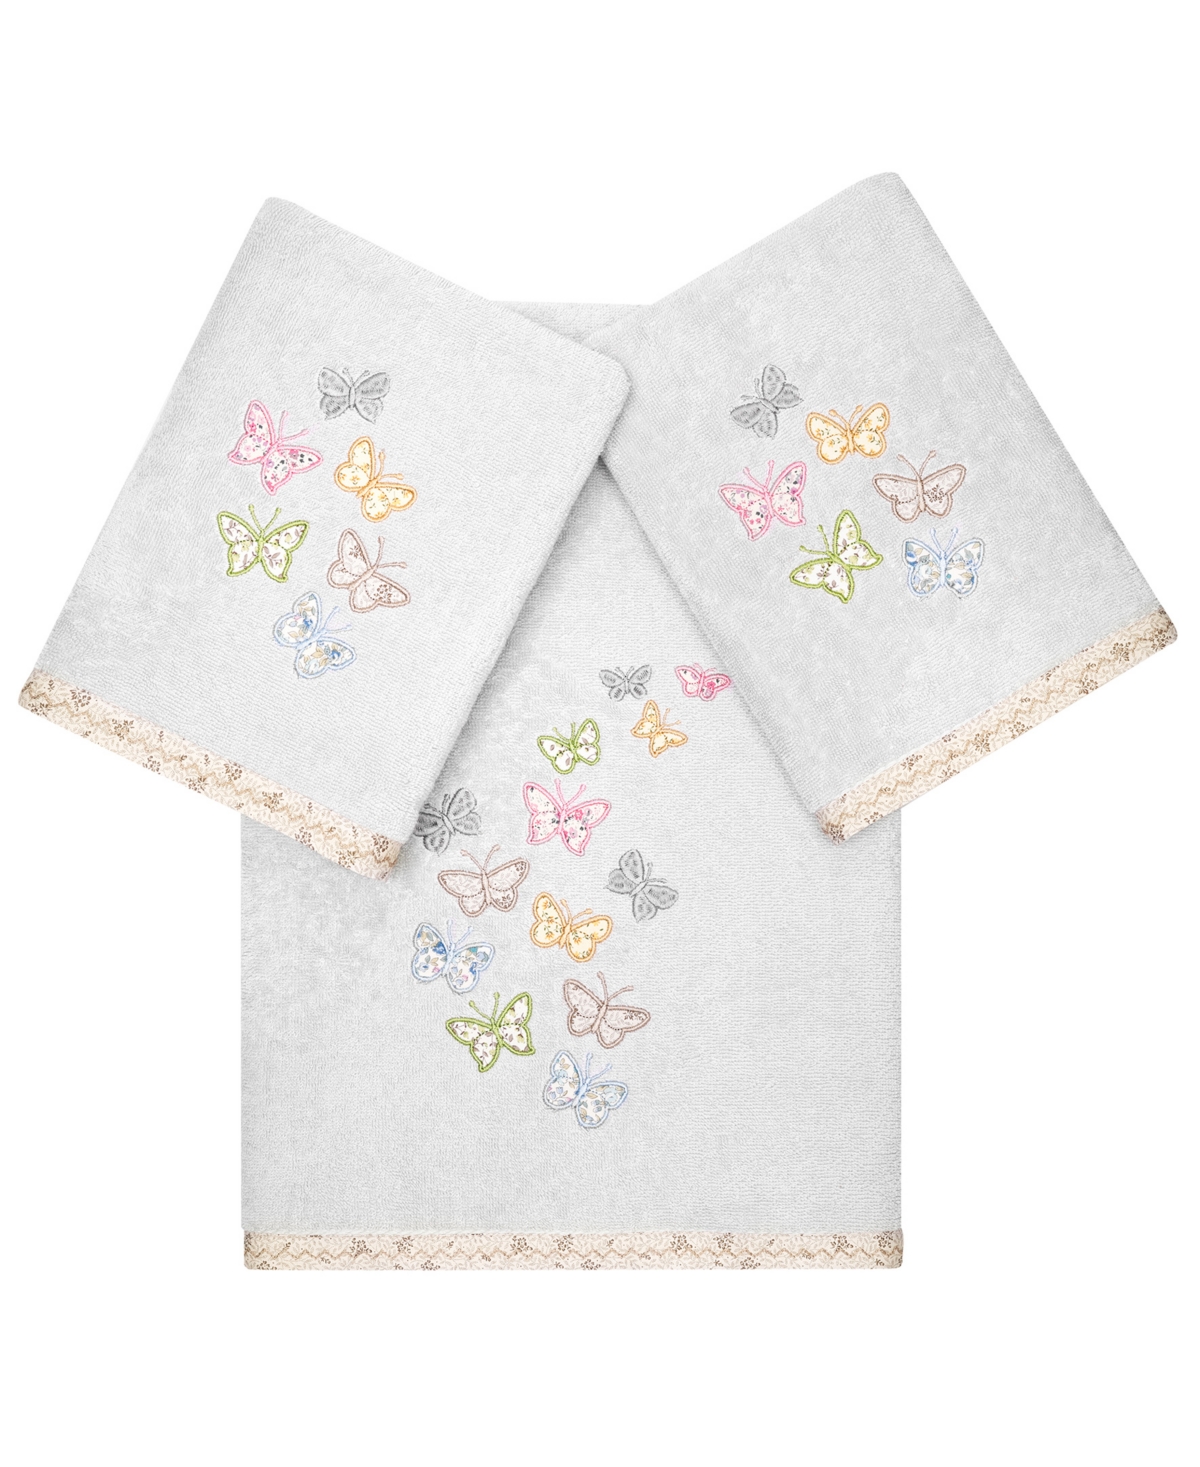 Linum Home Textiles Turkish Cotton Mariposa Embellished Towel Set, 3 Piece Bedding In Silver